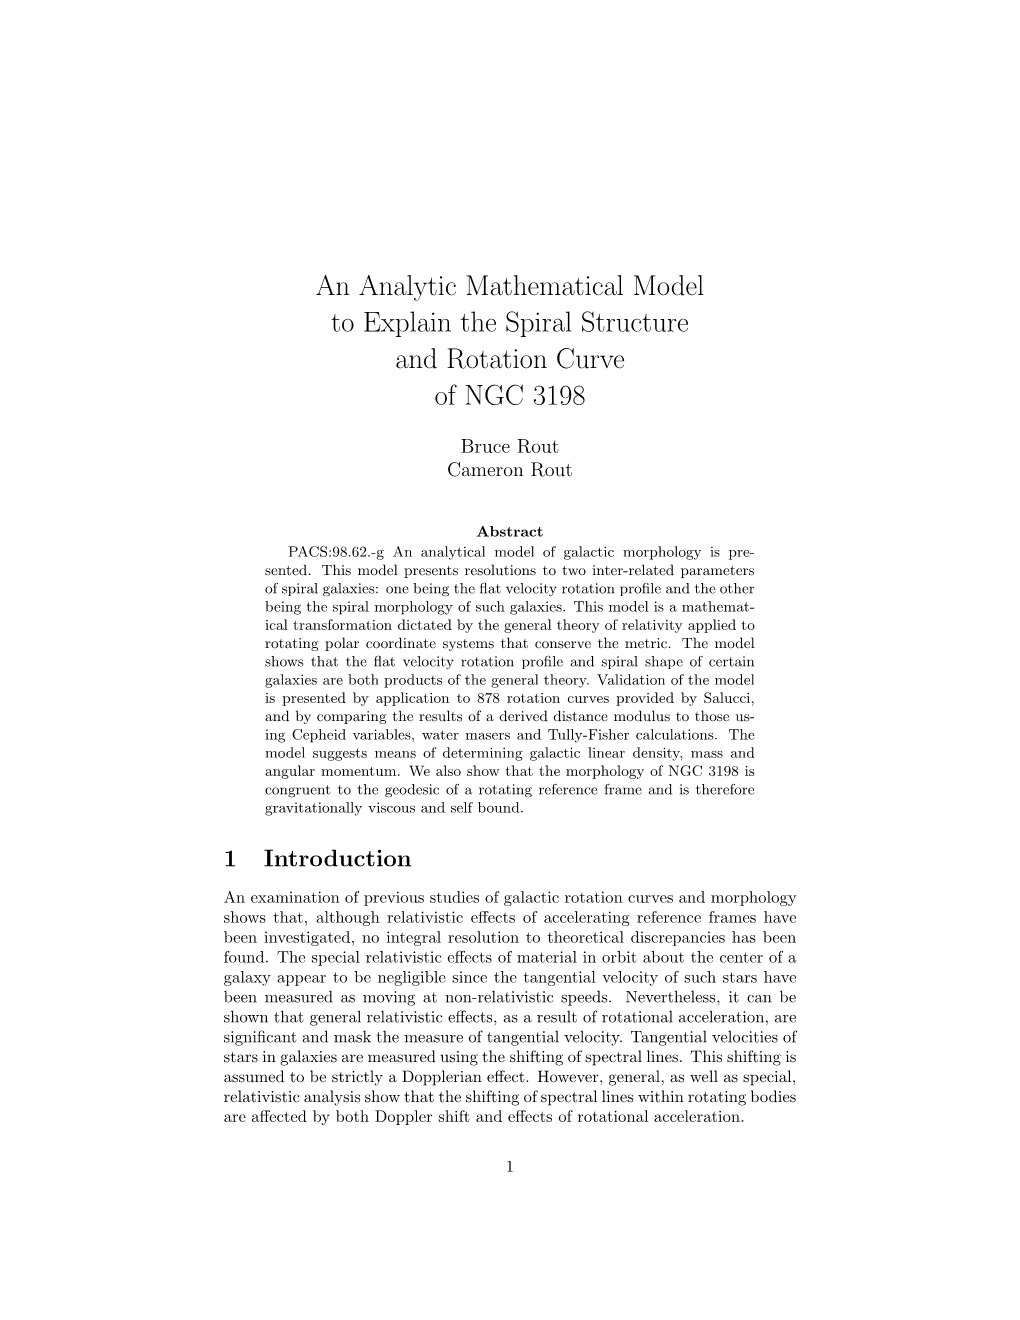 An Analytic Mathematical Model to Explain the Spiral Structure and Rotation Curve of NGC 3198